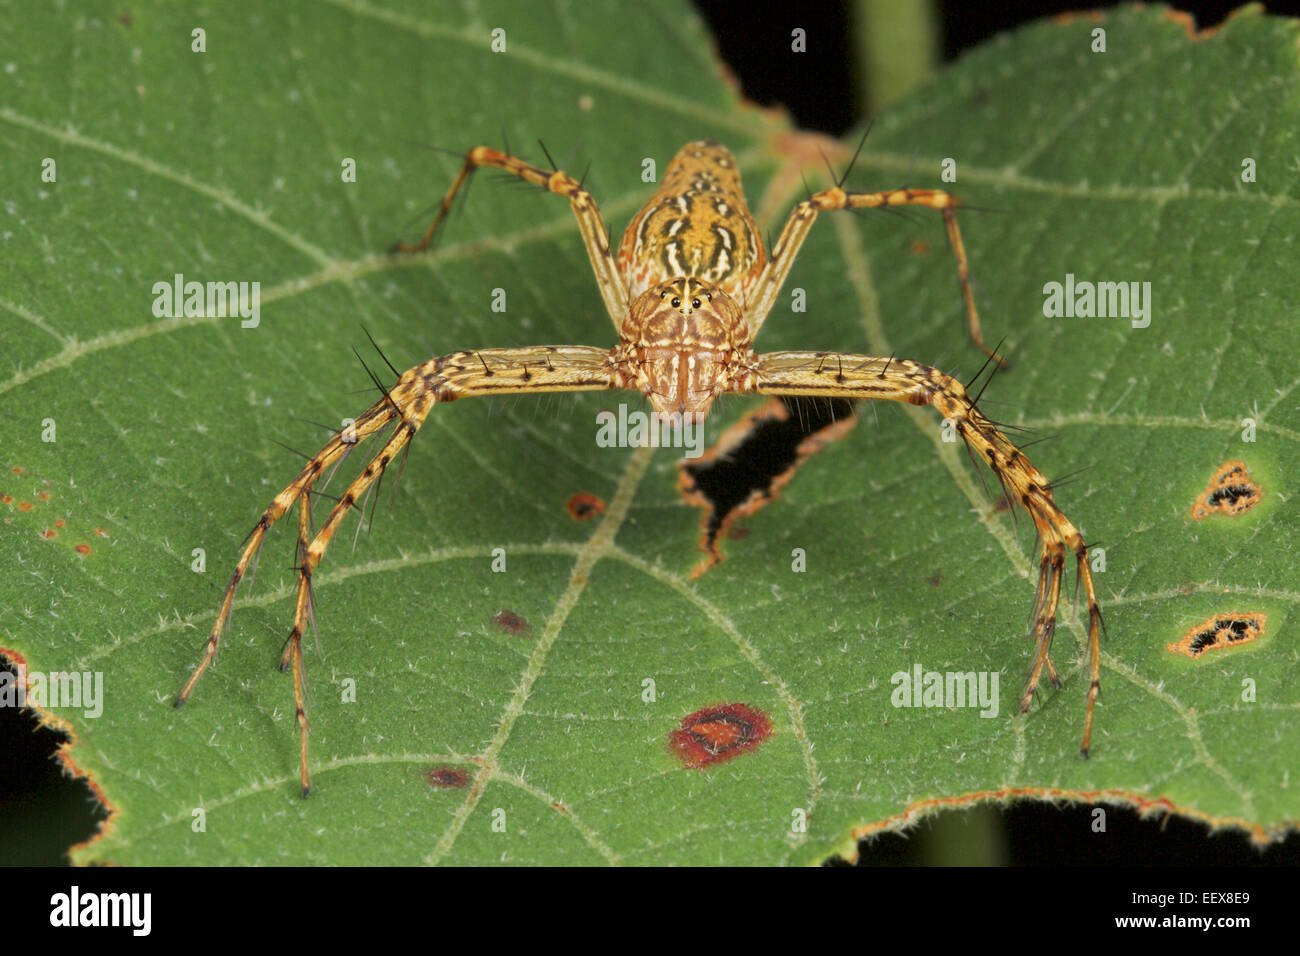 Un Oxyopes sp. lynx spider (Oxyopidae). Foto Stock